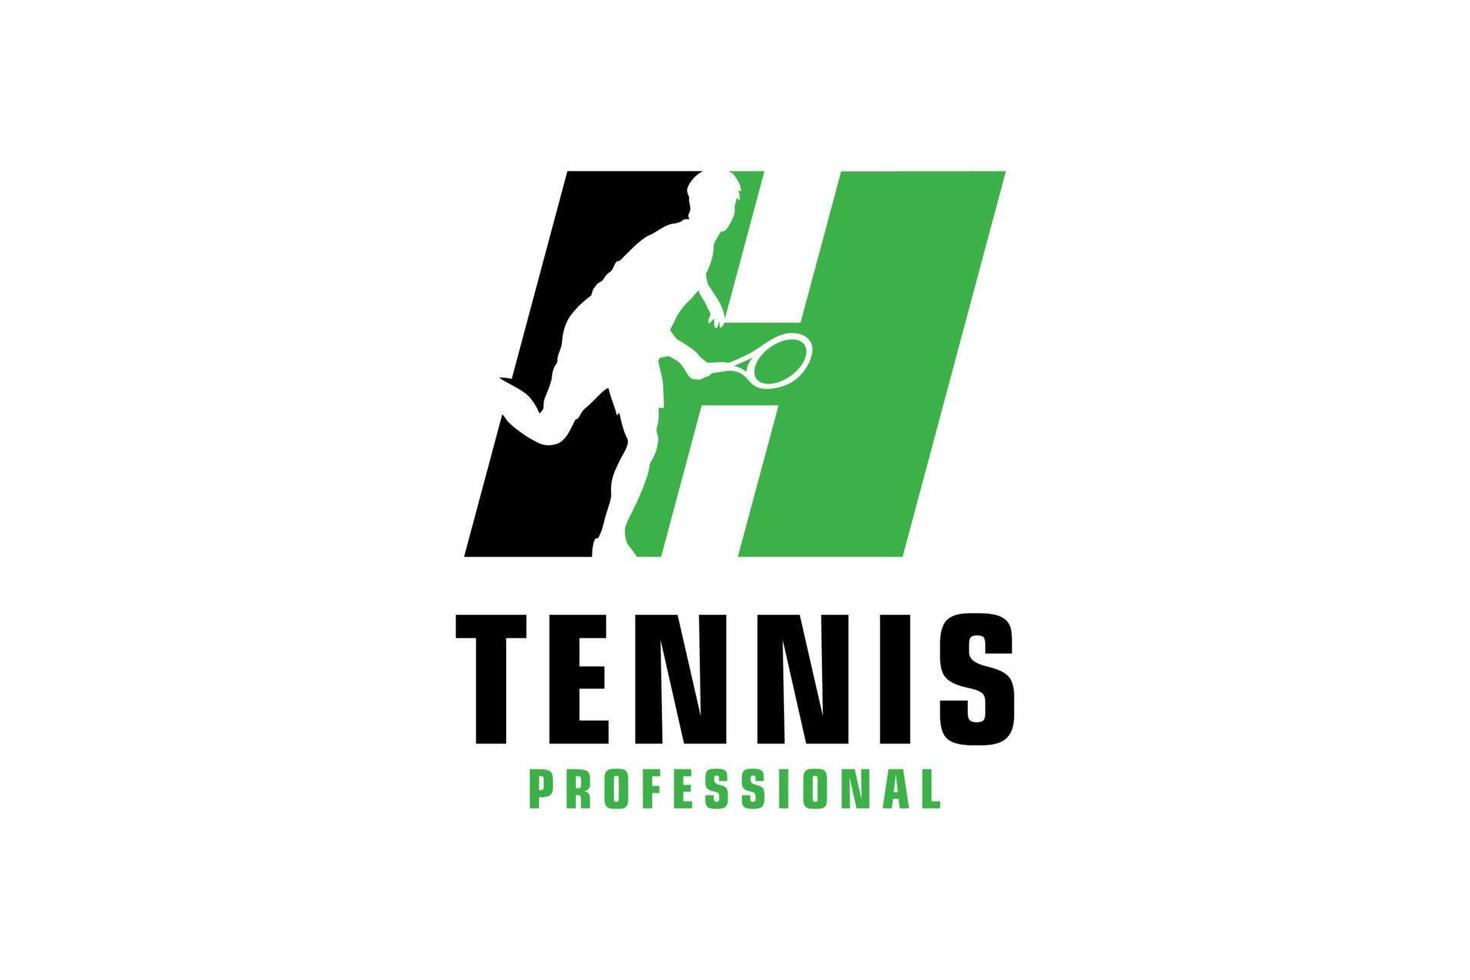 Letter H with Tennis player silhouette Logo Design. Vector Design Template Elements for Sport Team or Corporate Identity.